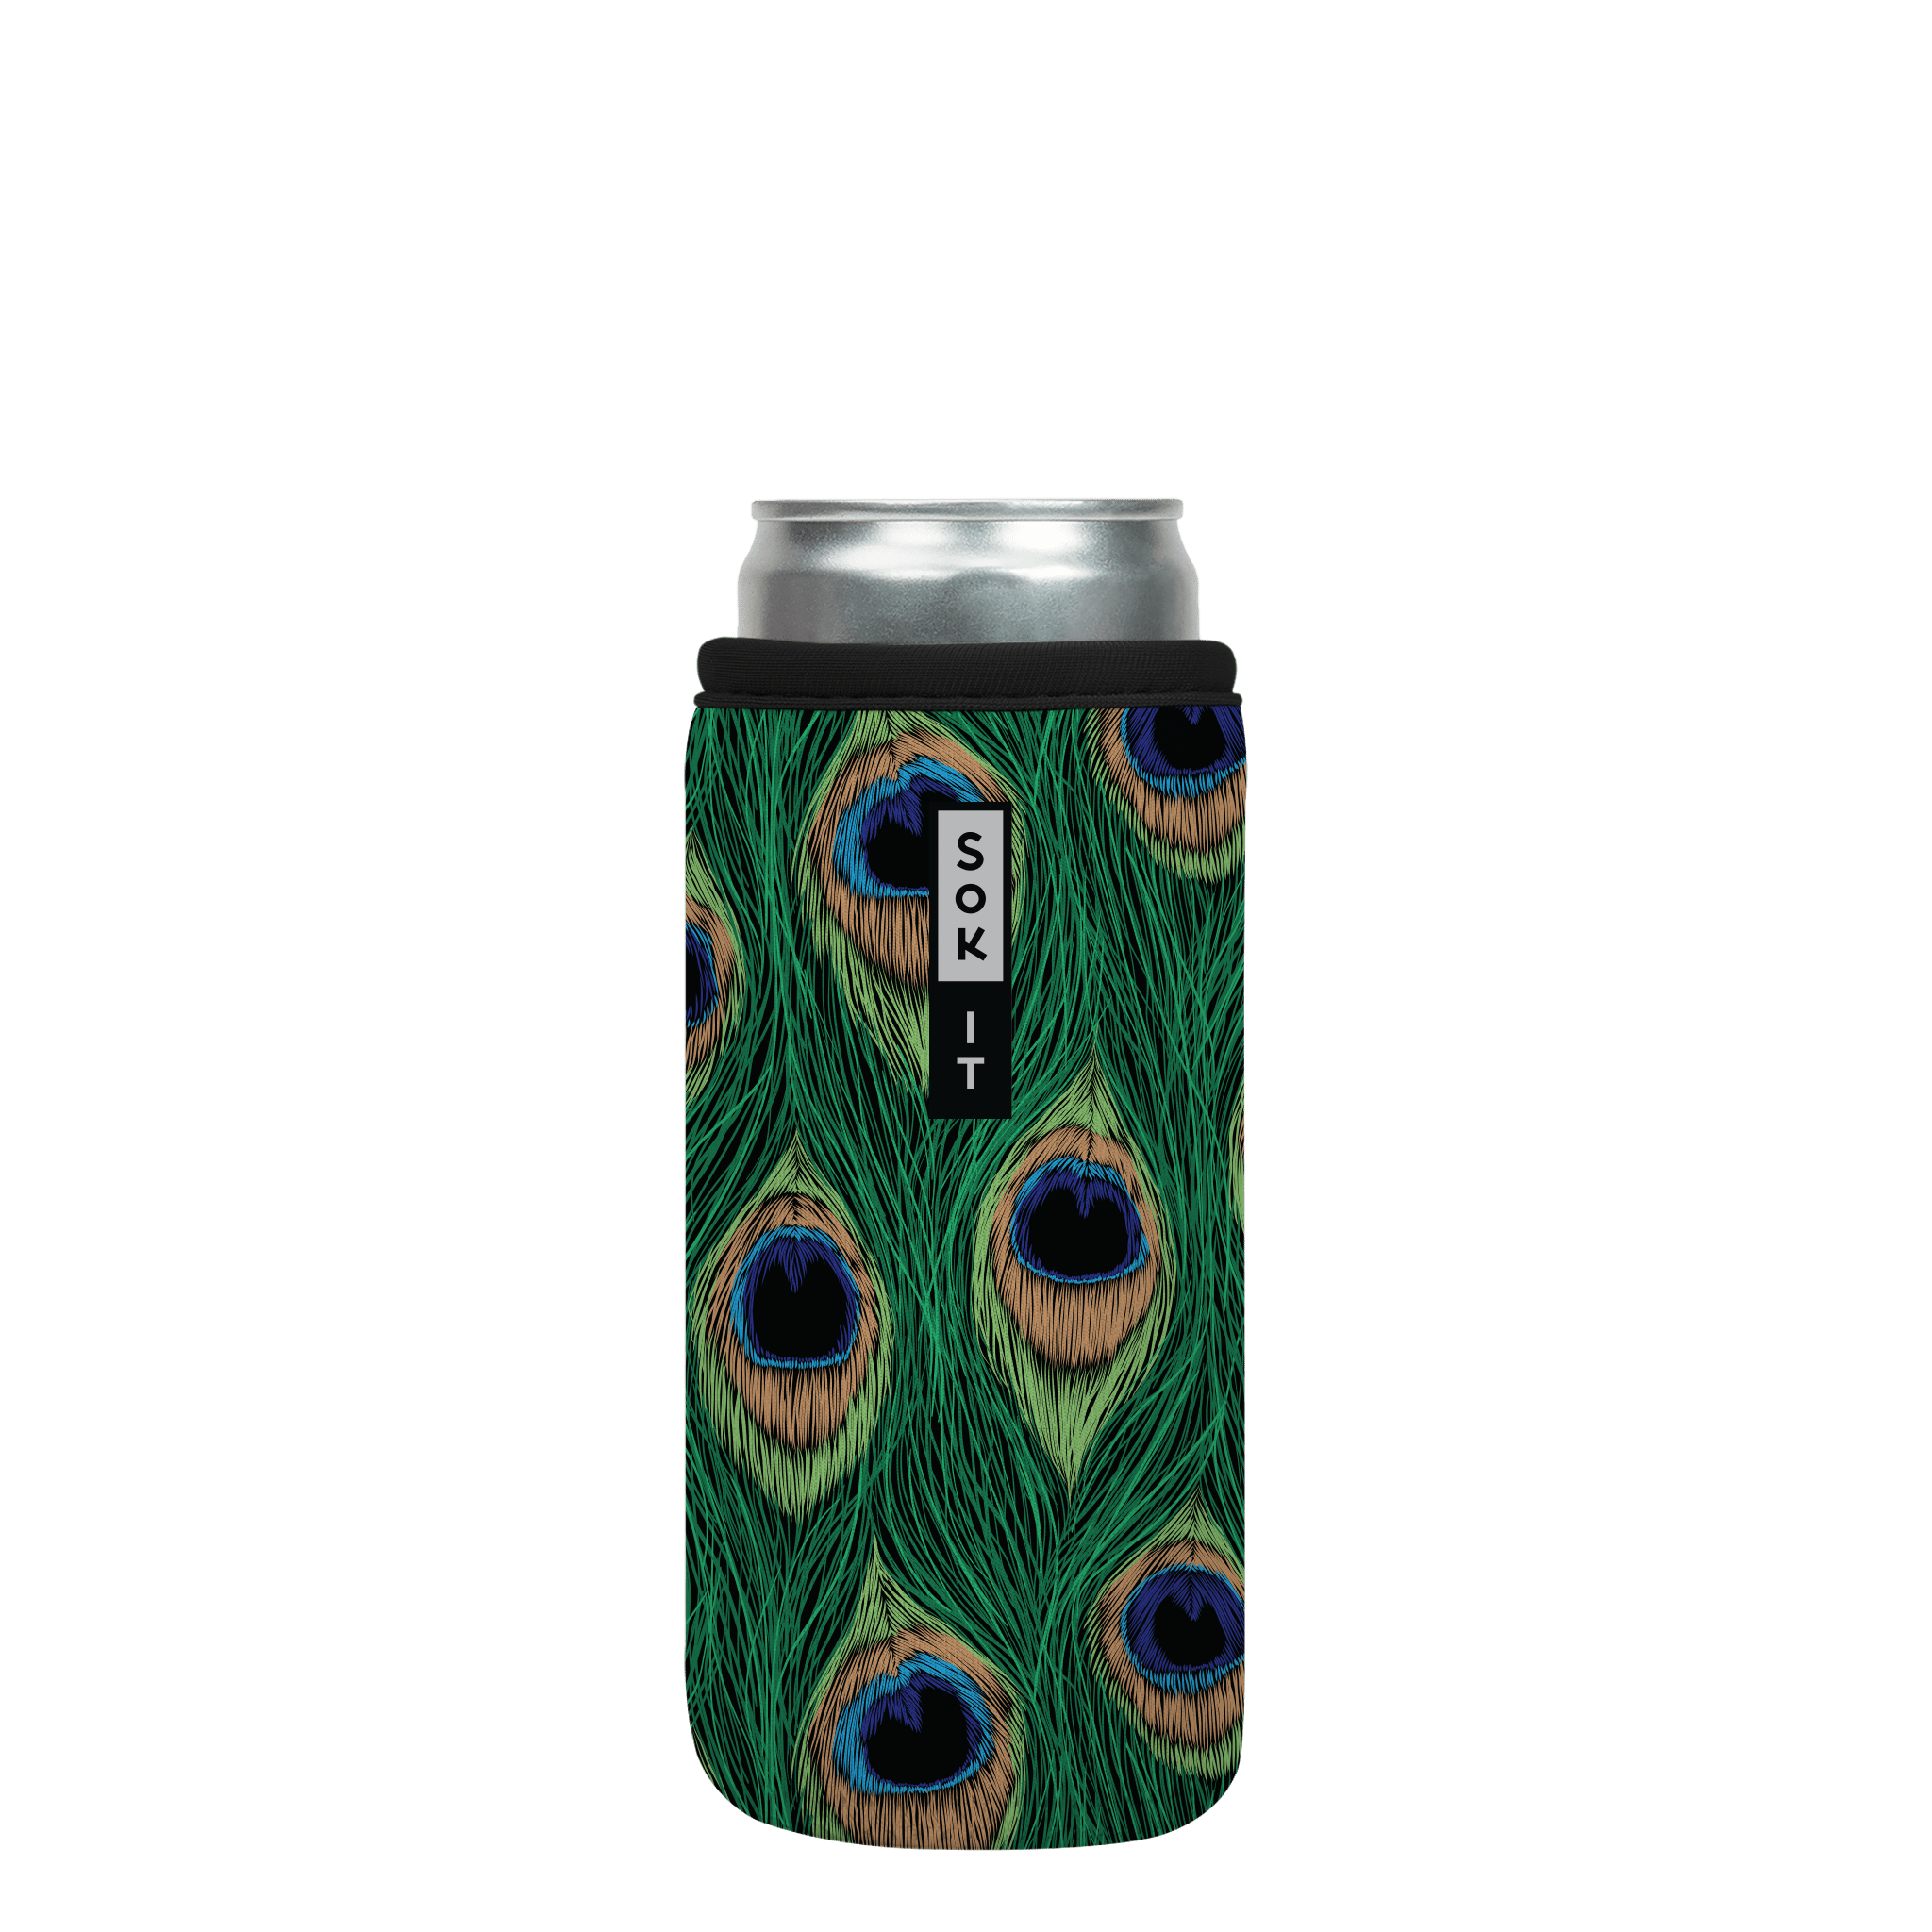 CanSok Peacock 12oz Slim Can